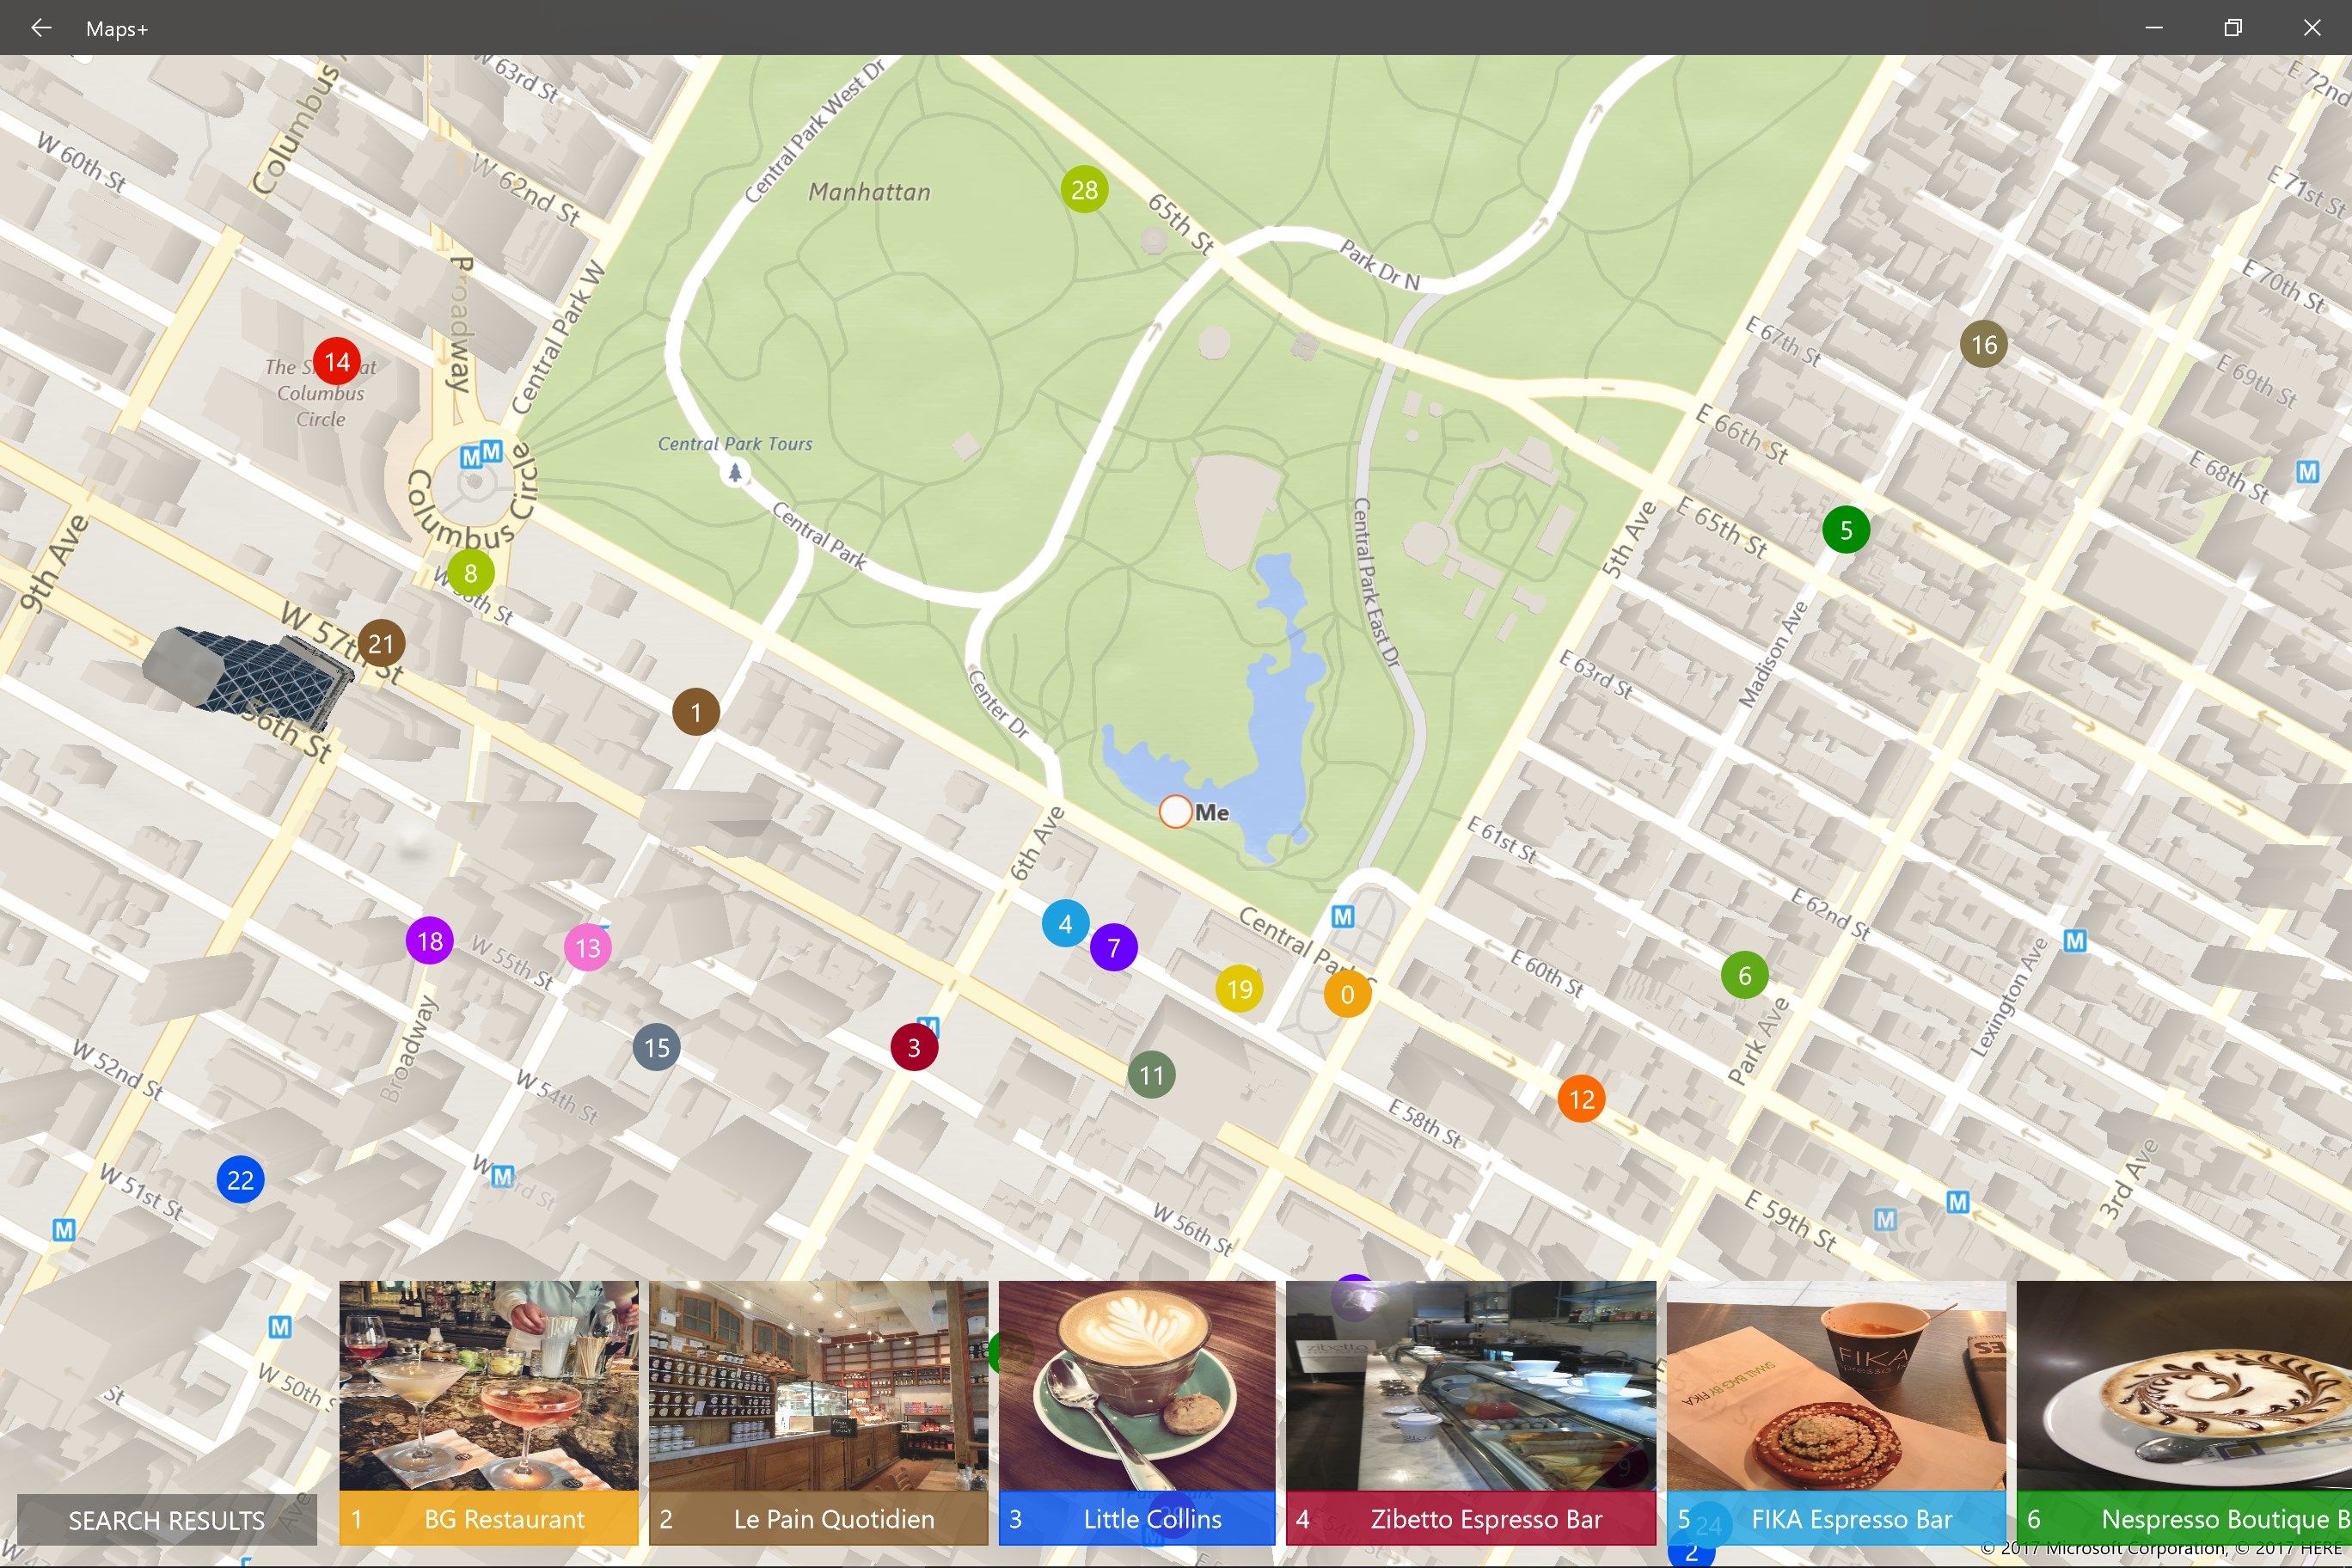 Full screen map view of search results from Foursquare